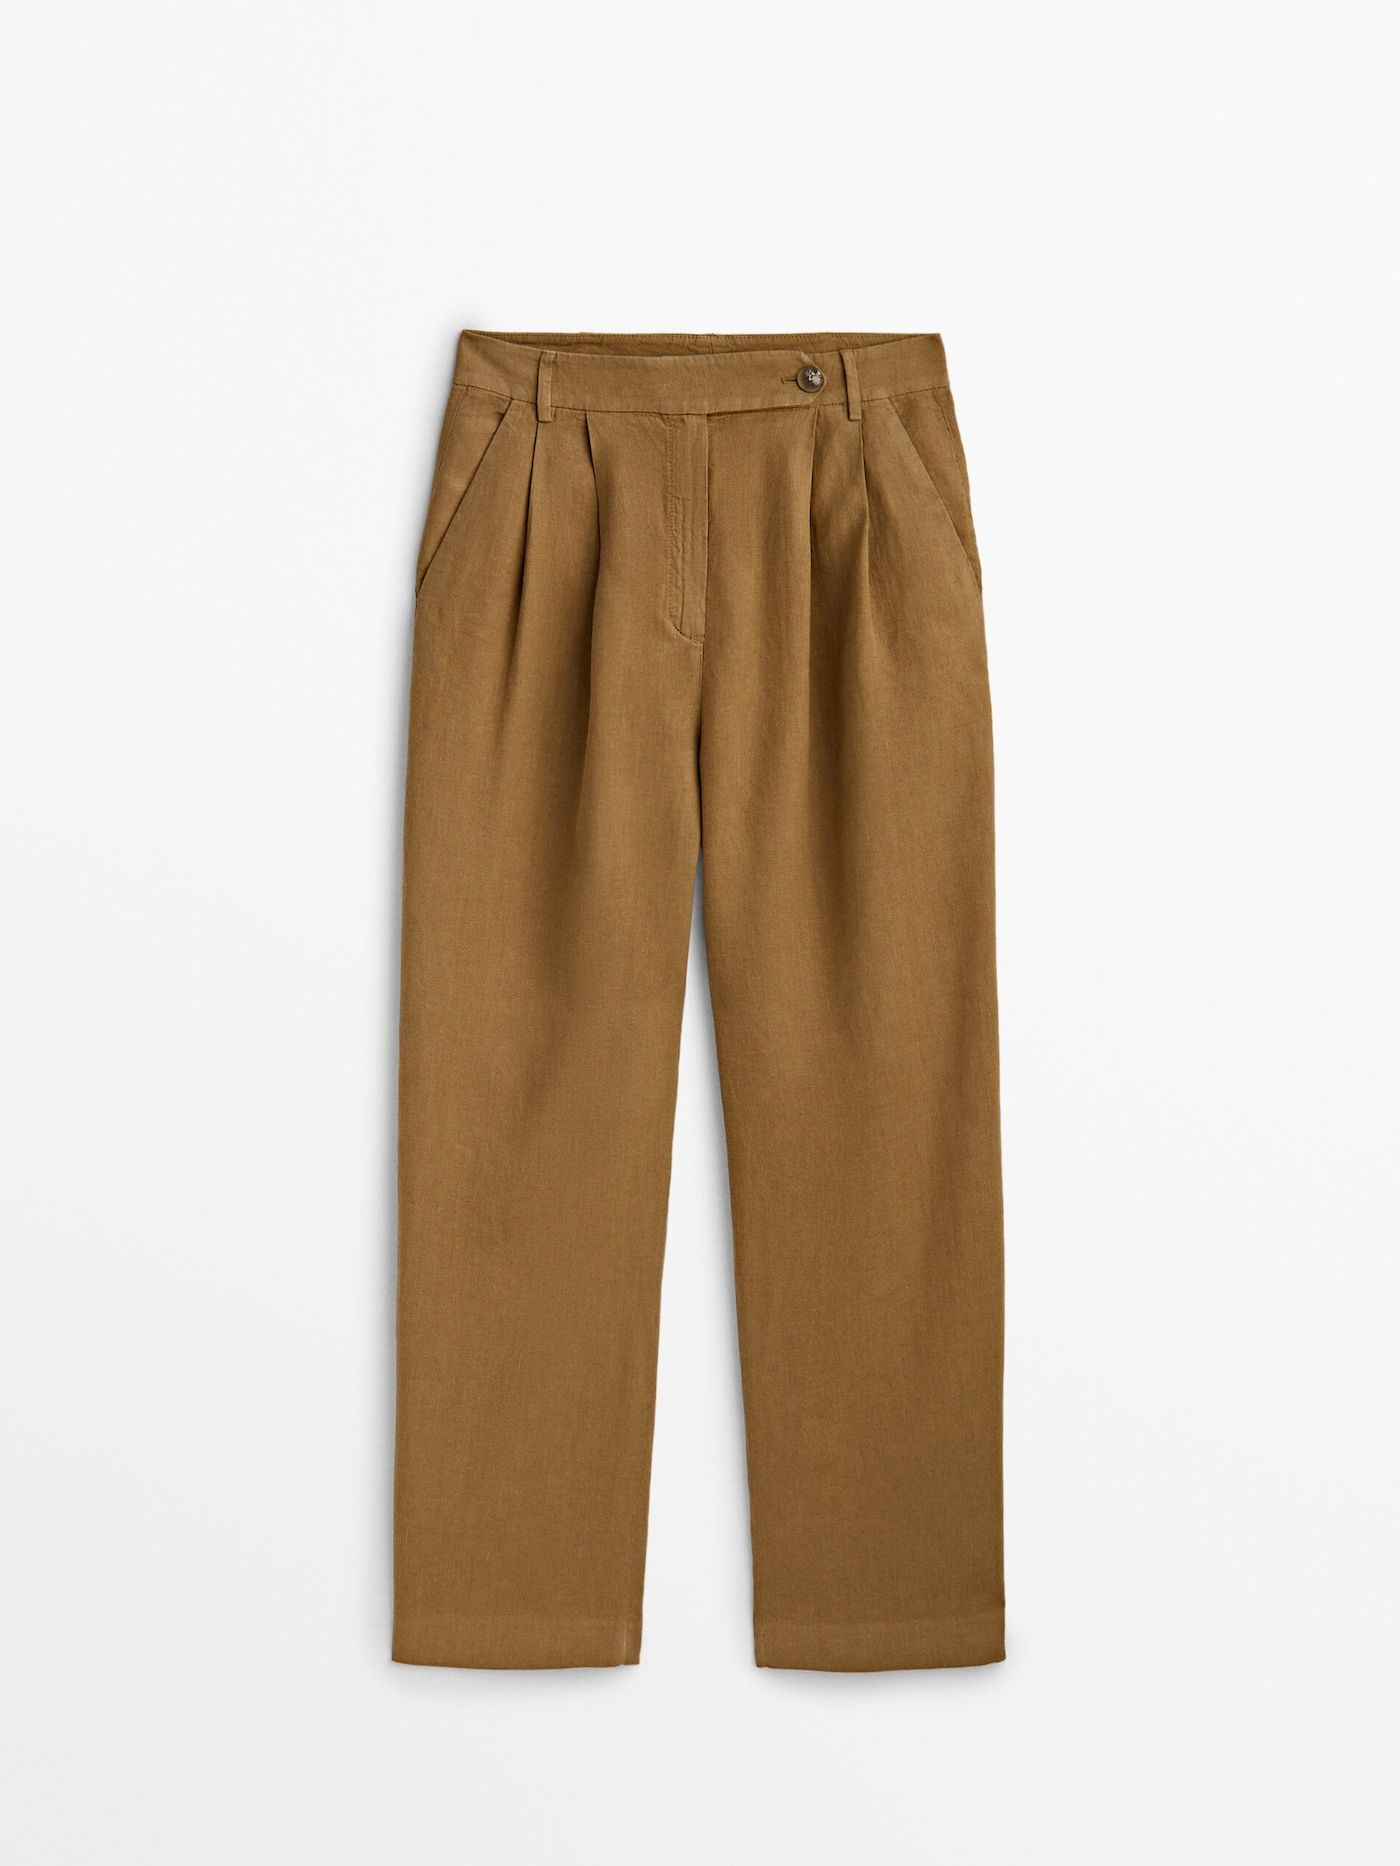 Linen and cotton blend trousers with double dart detail | Massimo Dutti (US)